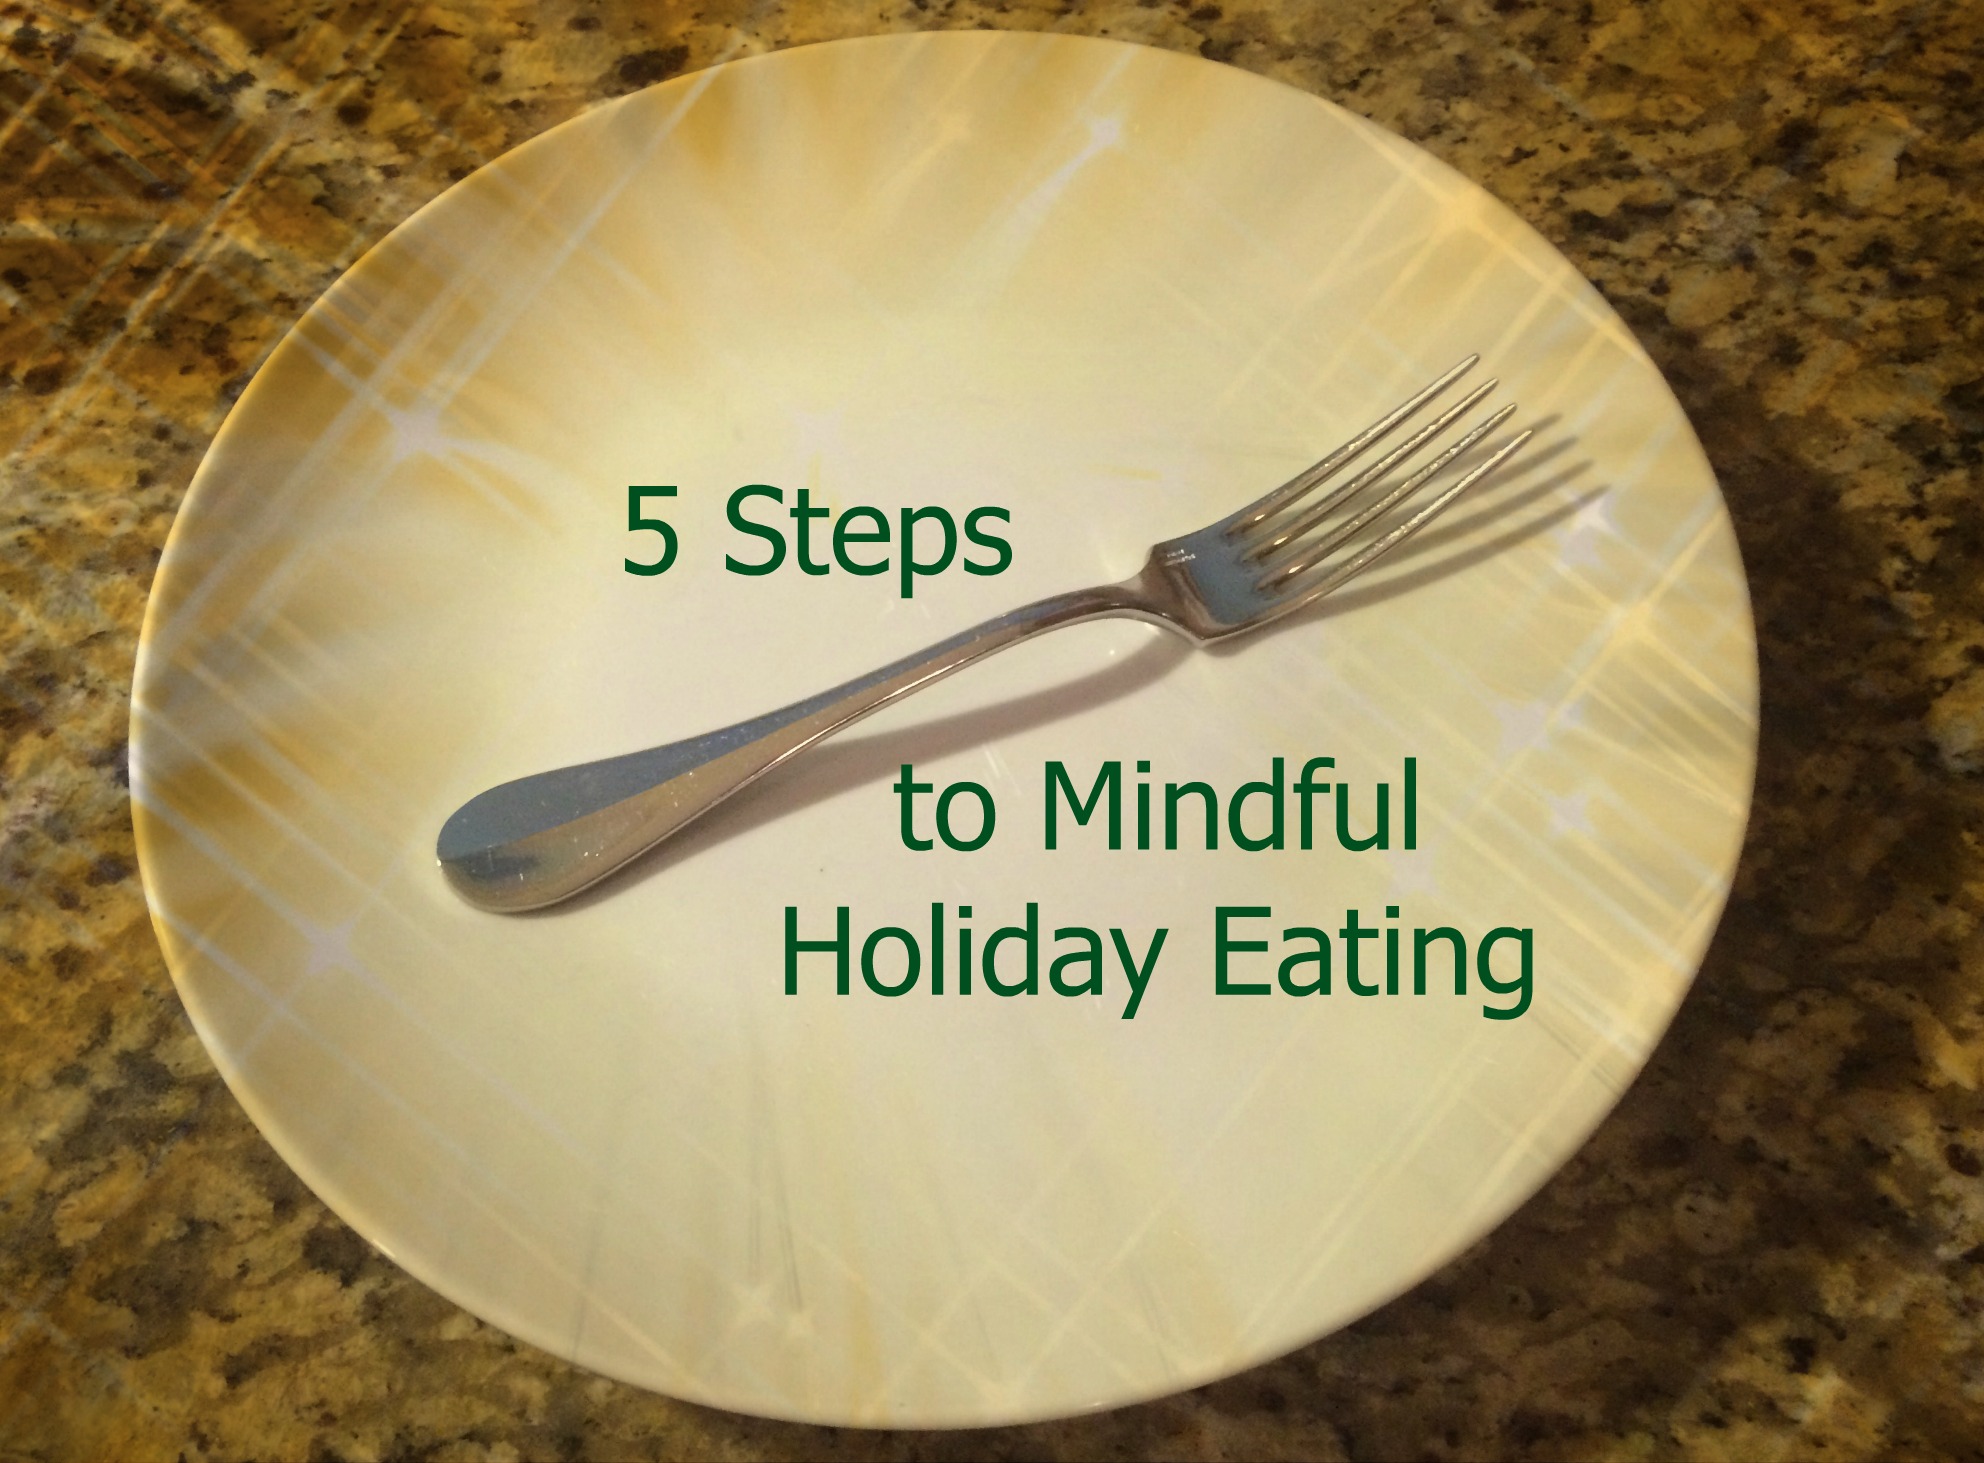 5 Steps to Mindful Holiday Eating